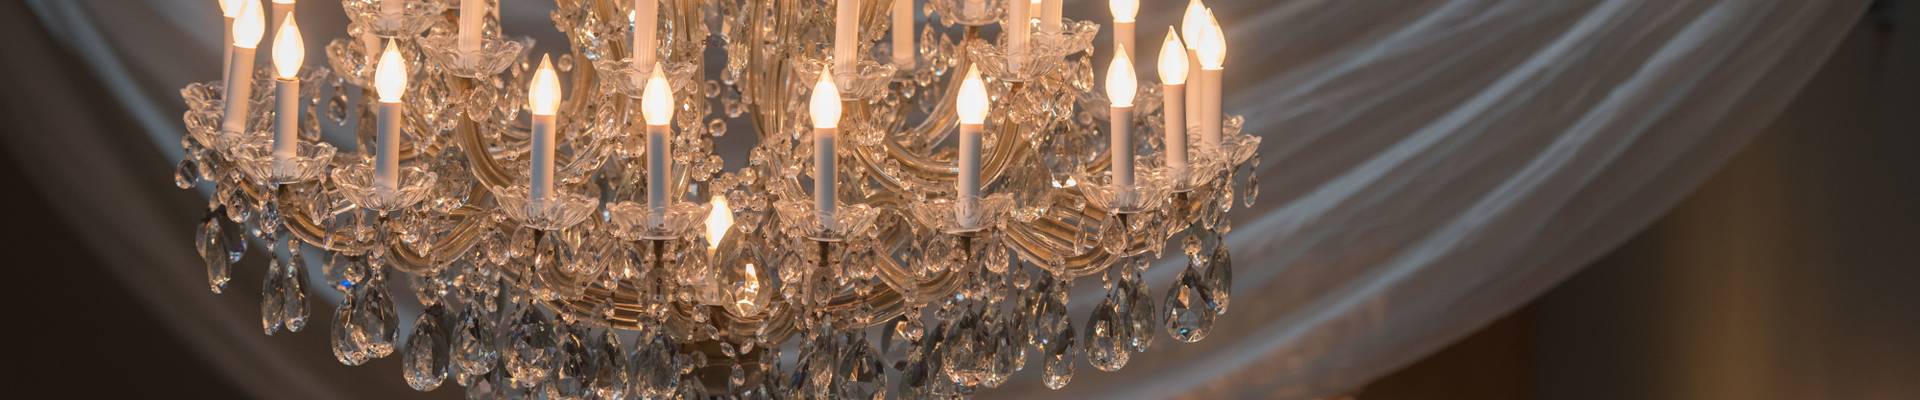 Chandeliers at Viennese Ball